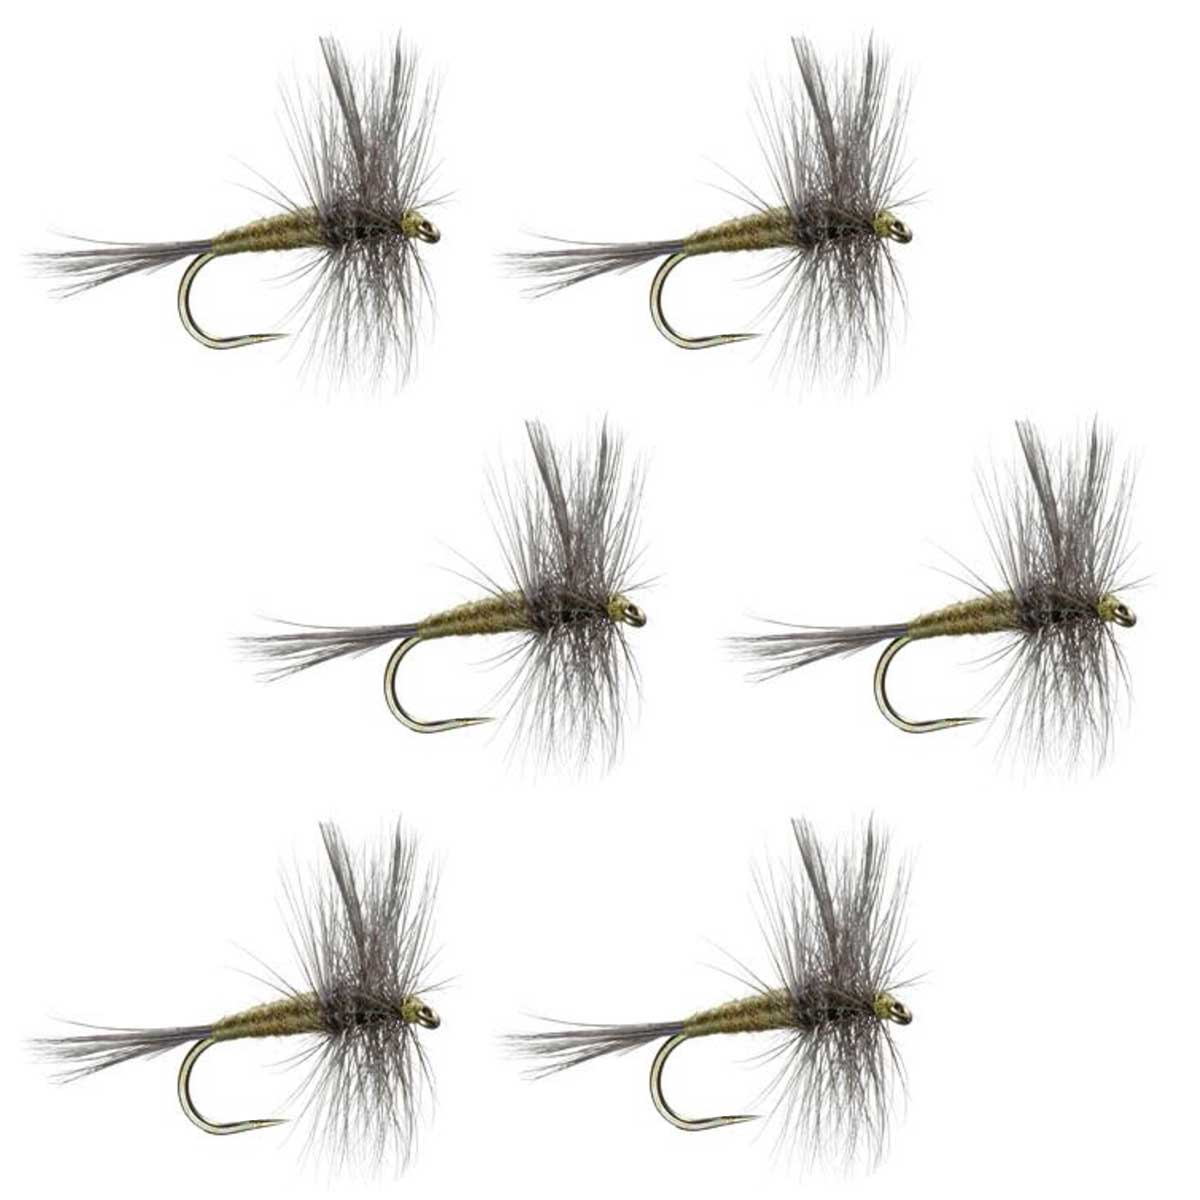 Barbless Blue Winged Olive BWO Classic Trout Dry Fly Fishing Flies - Set of 6 Flies Size 14